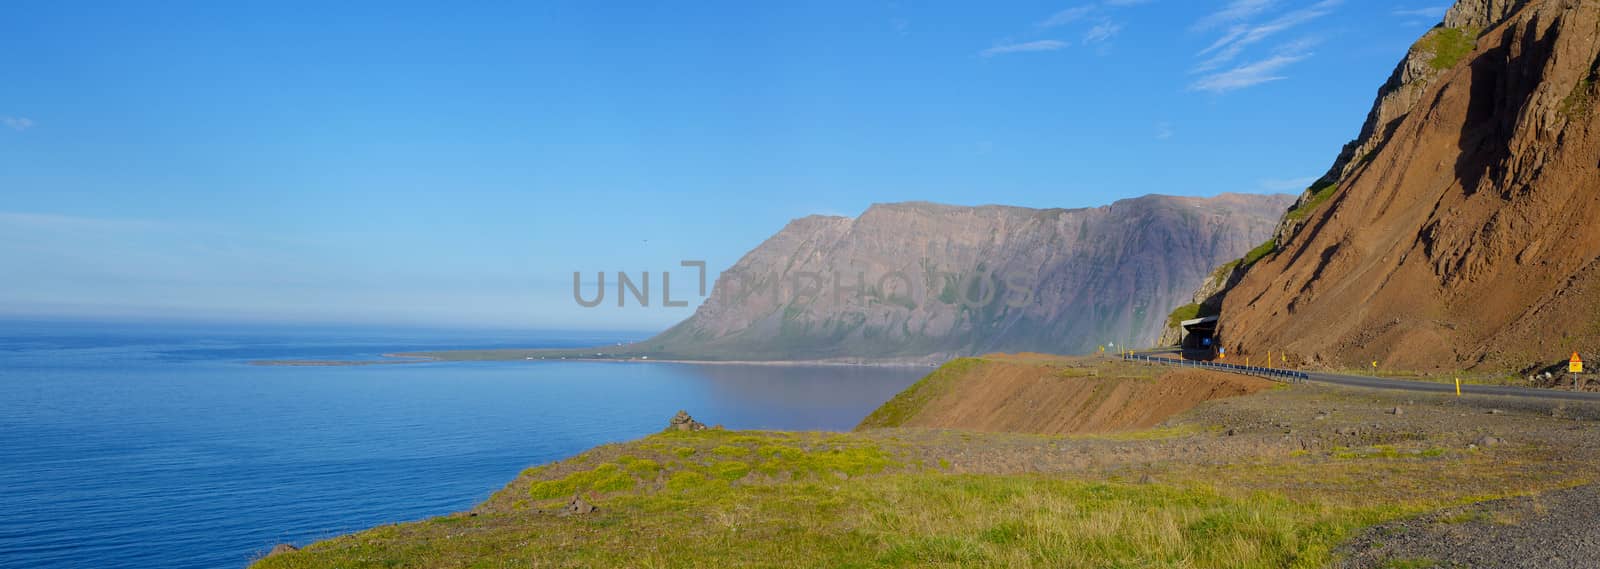 Iceland summer landscape. Fjord, house, mountains. Panorama.